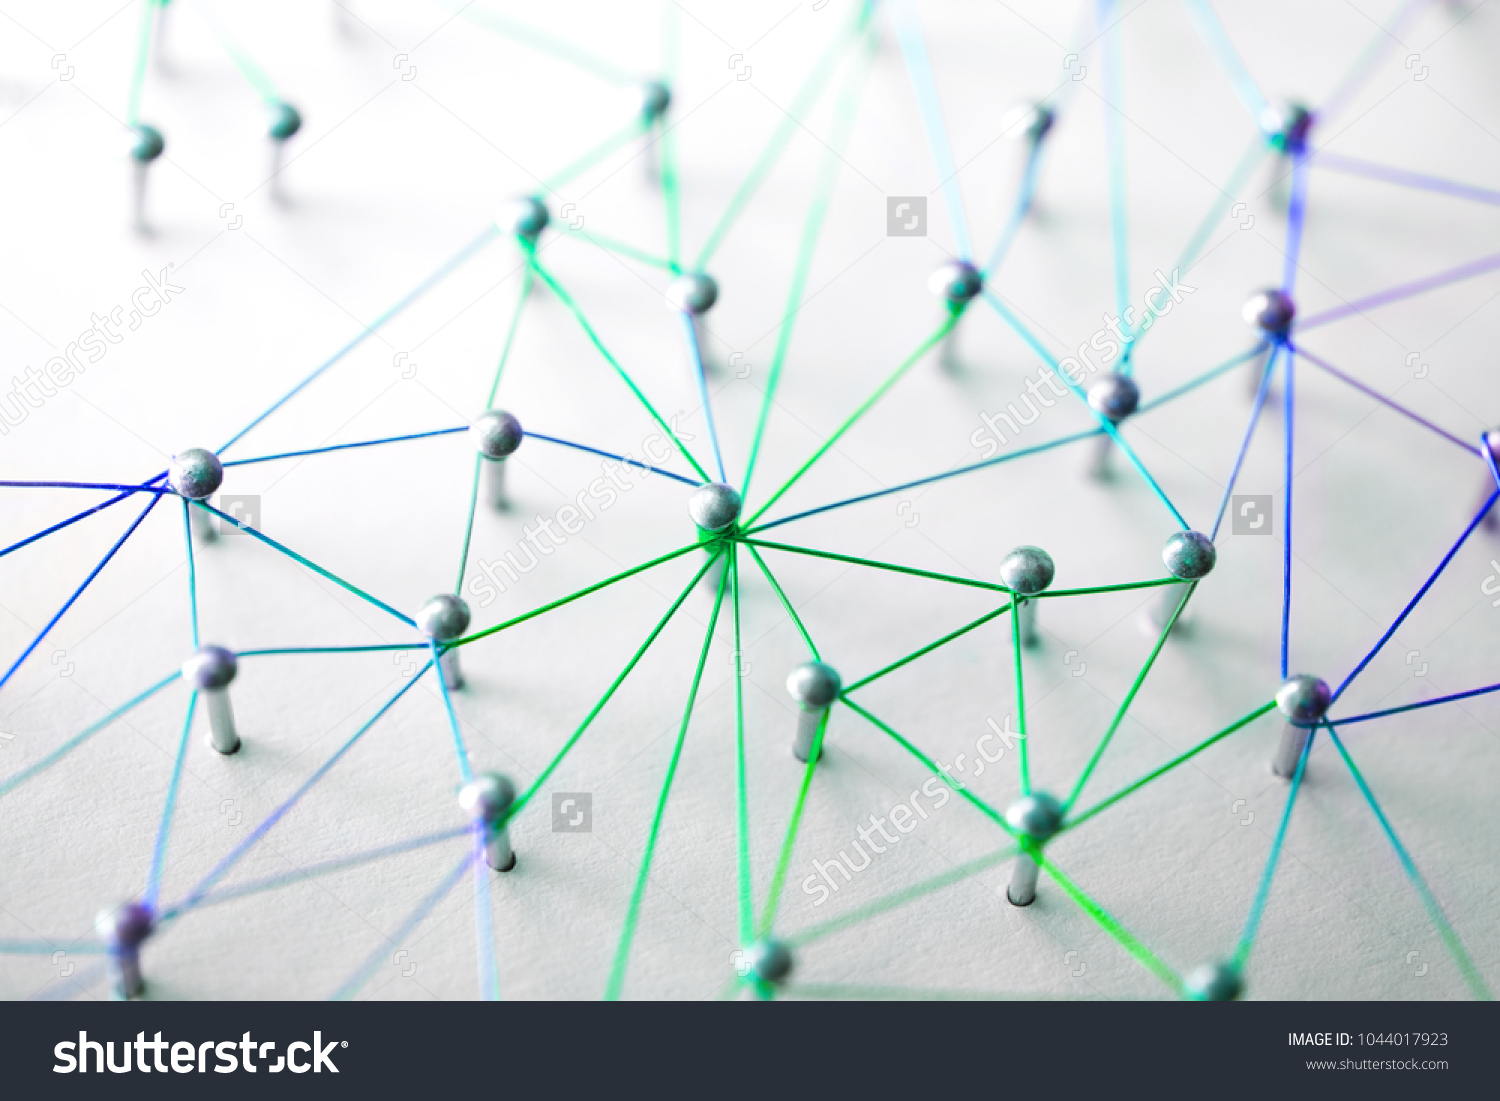 Linking entities. Networking, social media, SNS, internet communication abstract. devices or people connected to a network. Web of green, blue and purple wires on white background. Shallow DOF. #1044017923